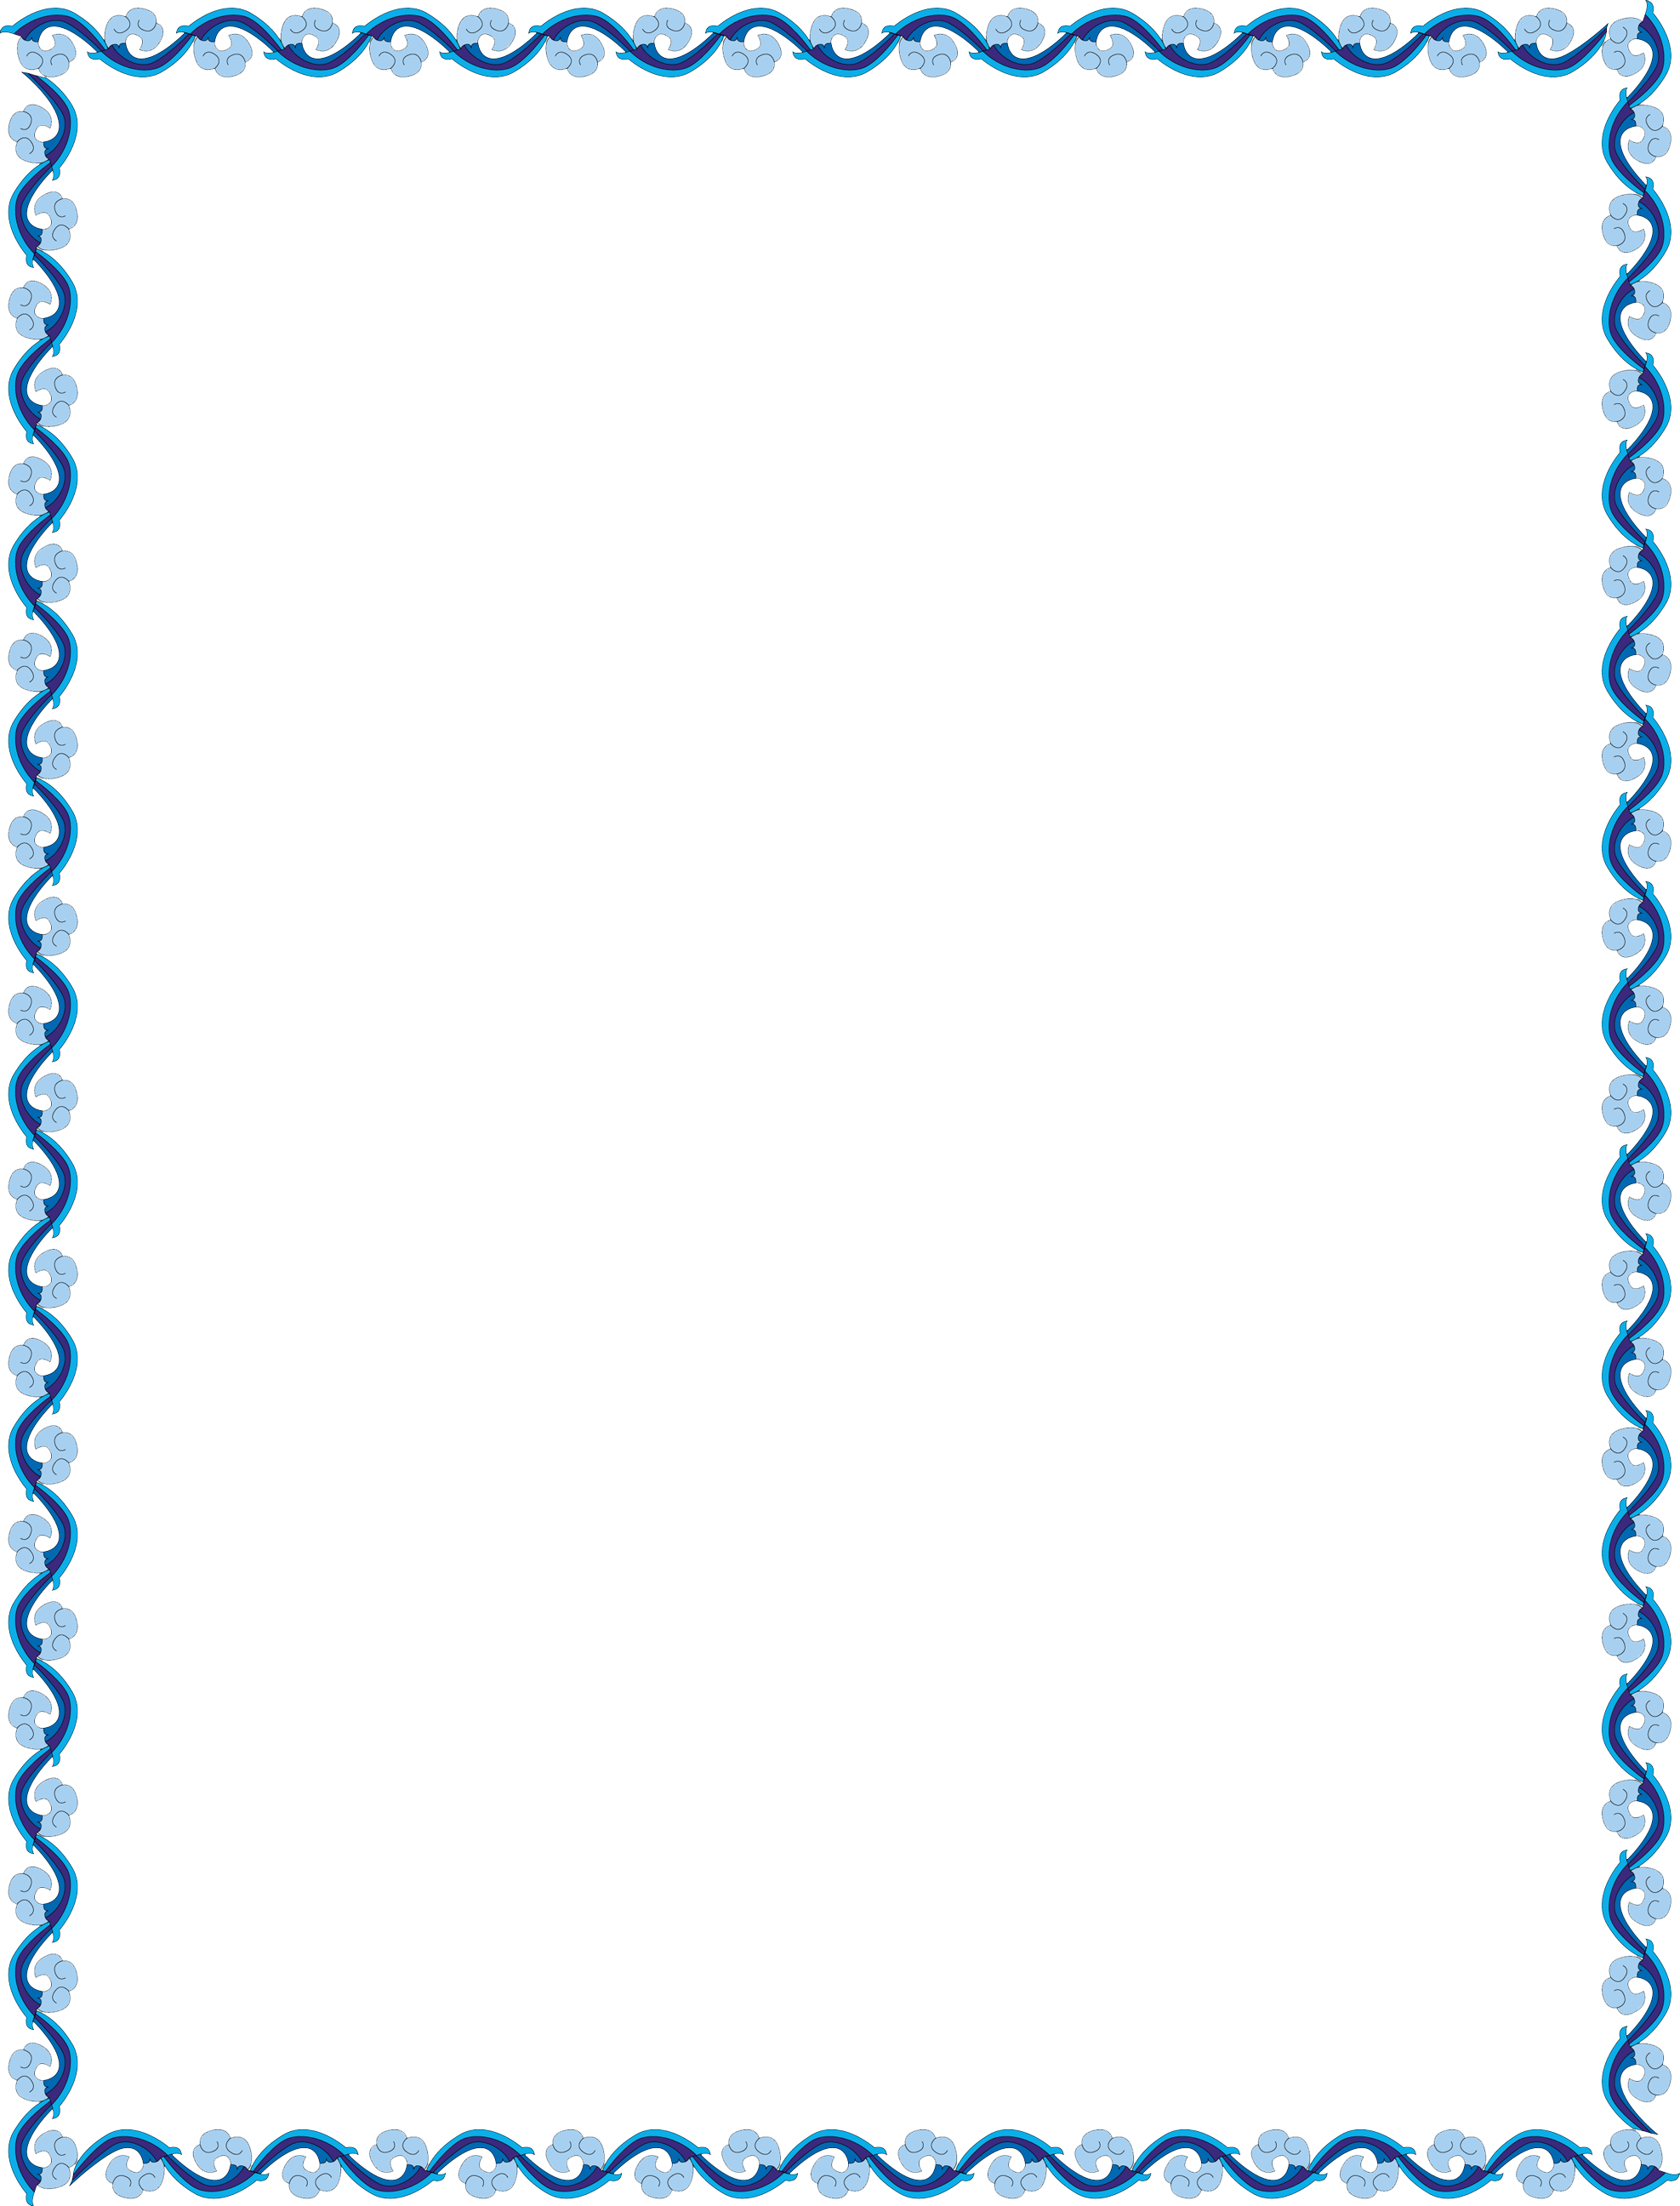 A Black Background With Blue And White Border